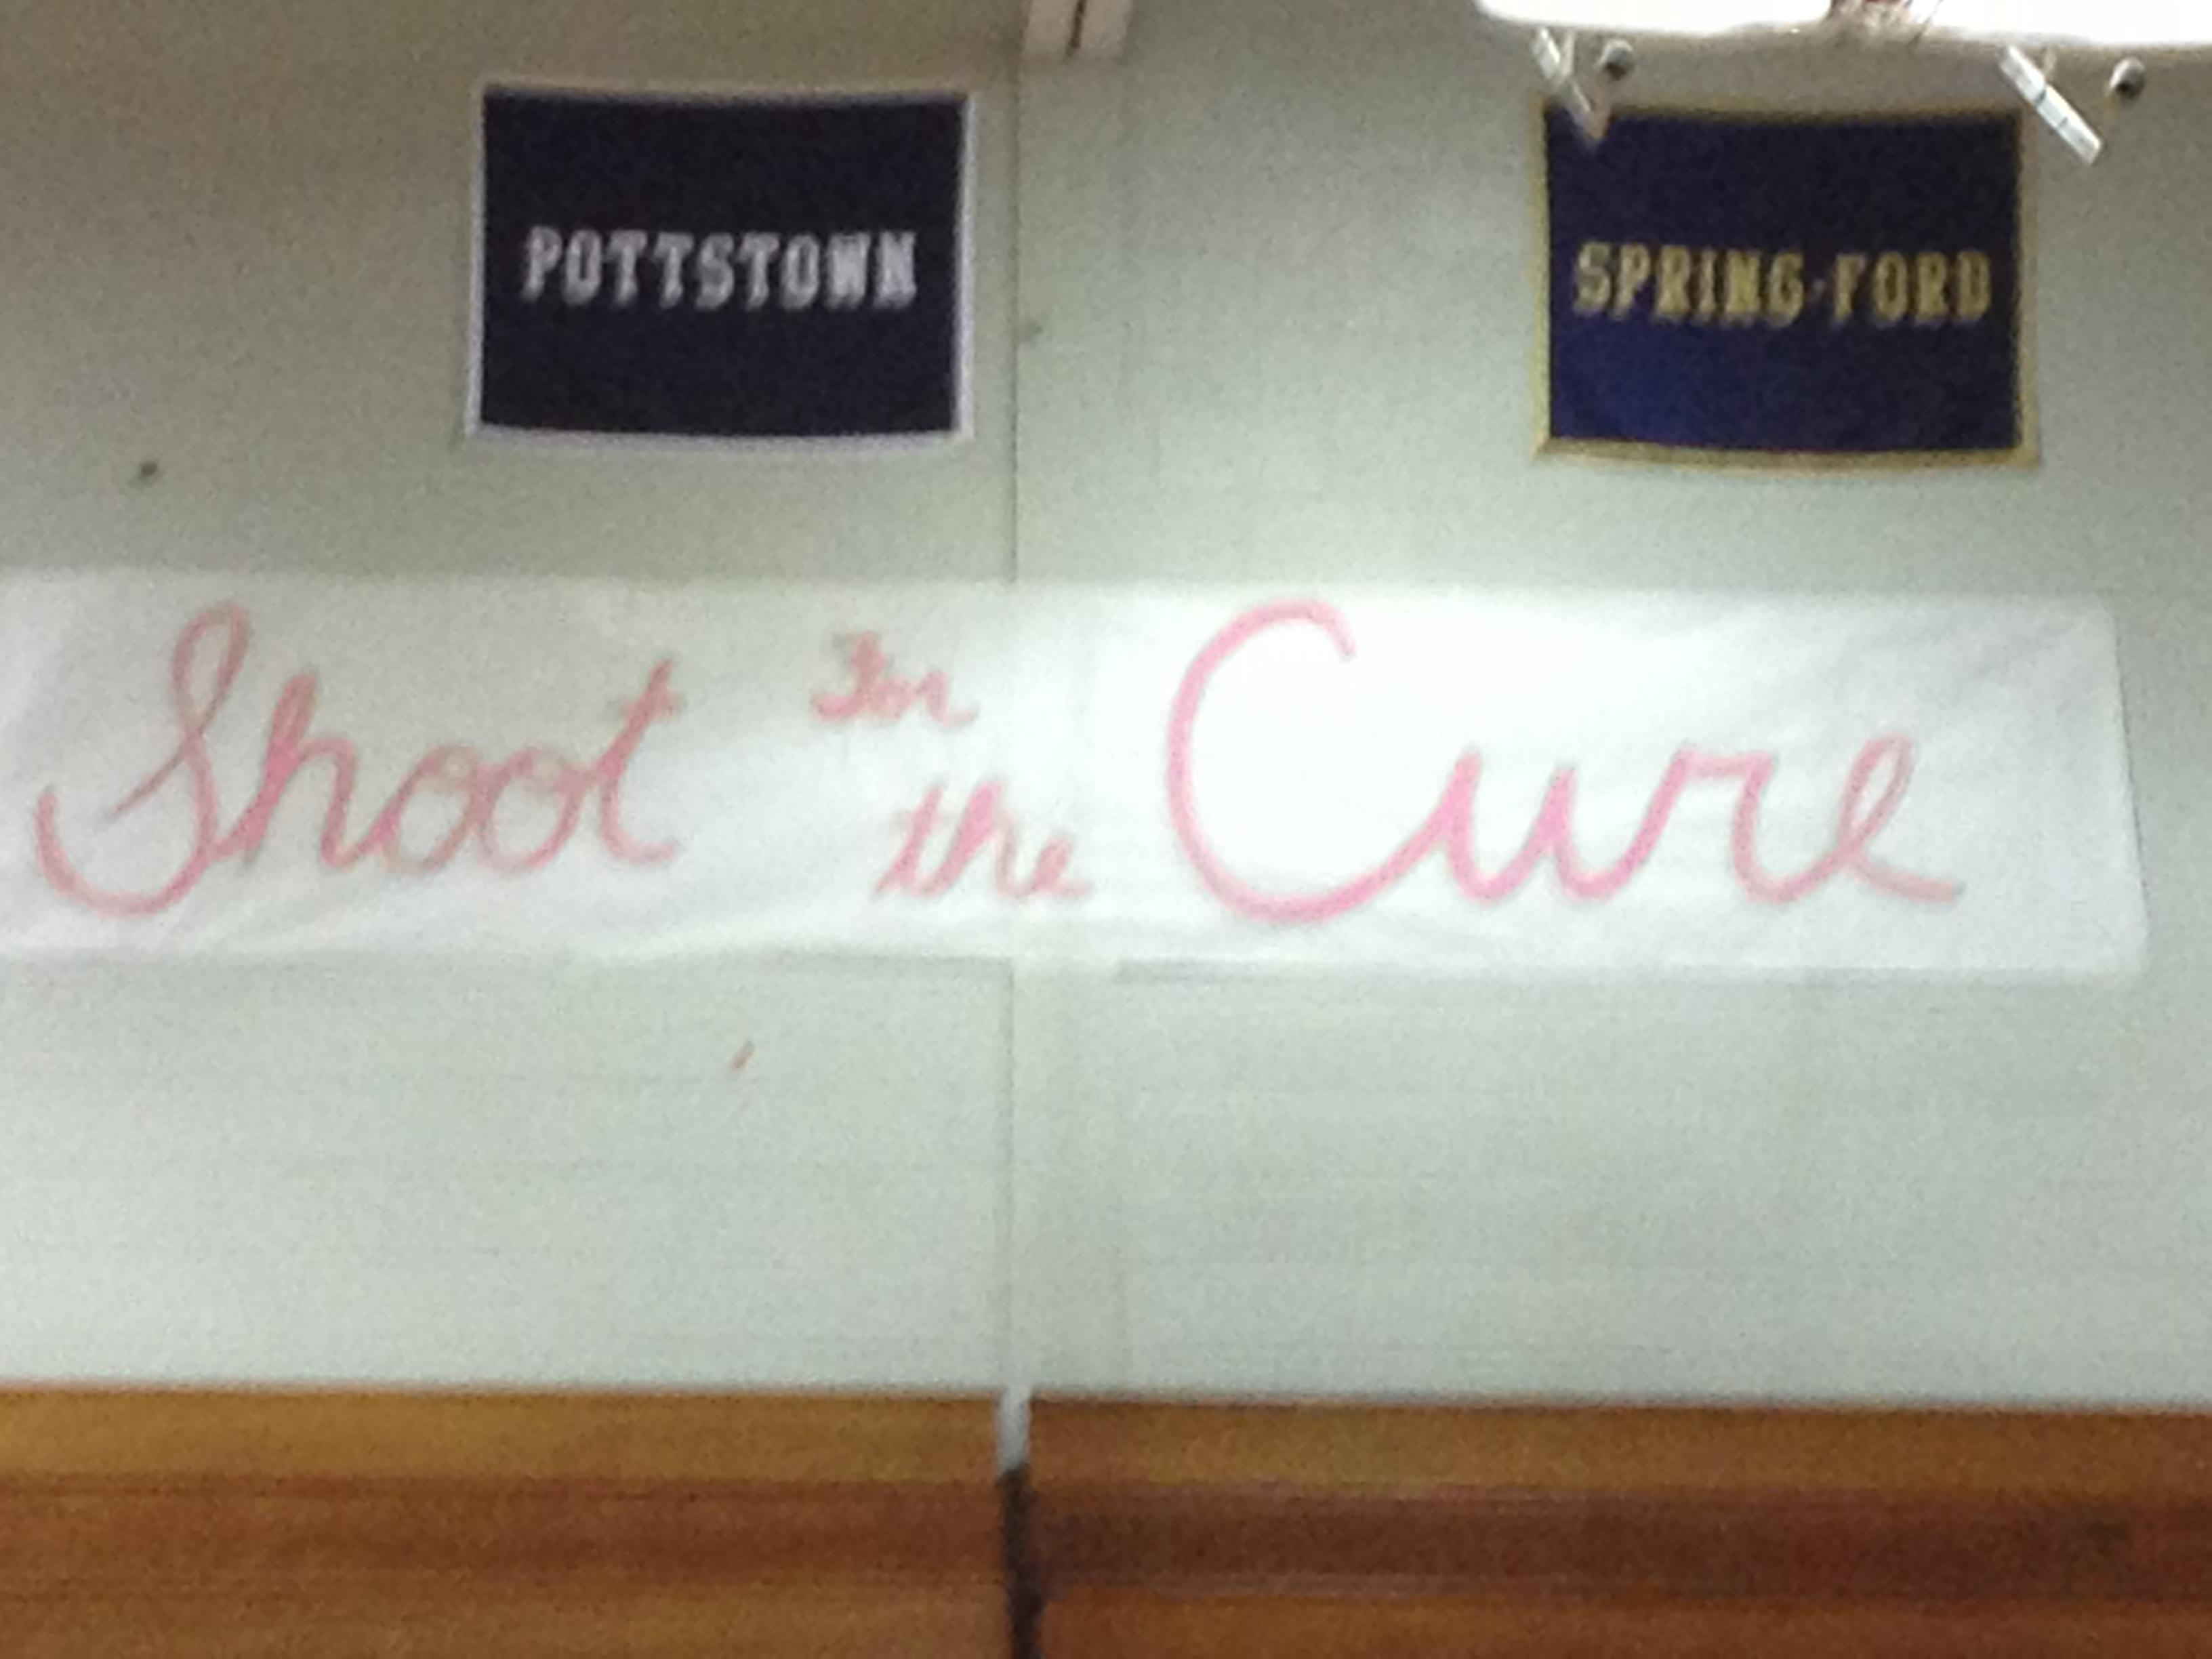 Shoot for the Cure Night